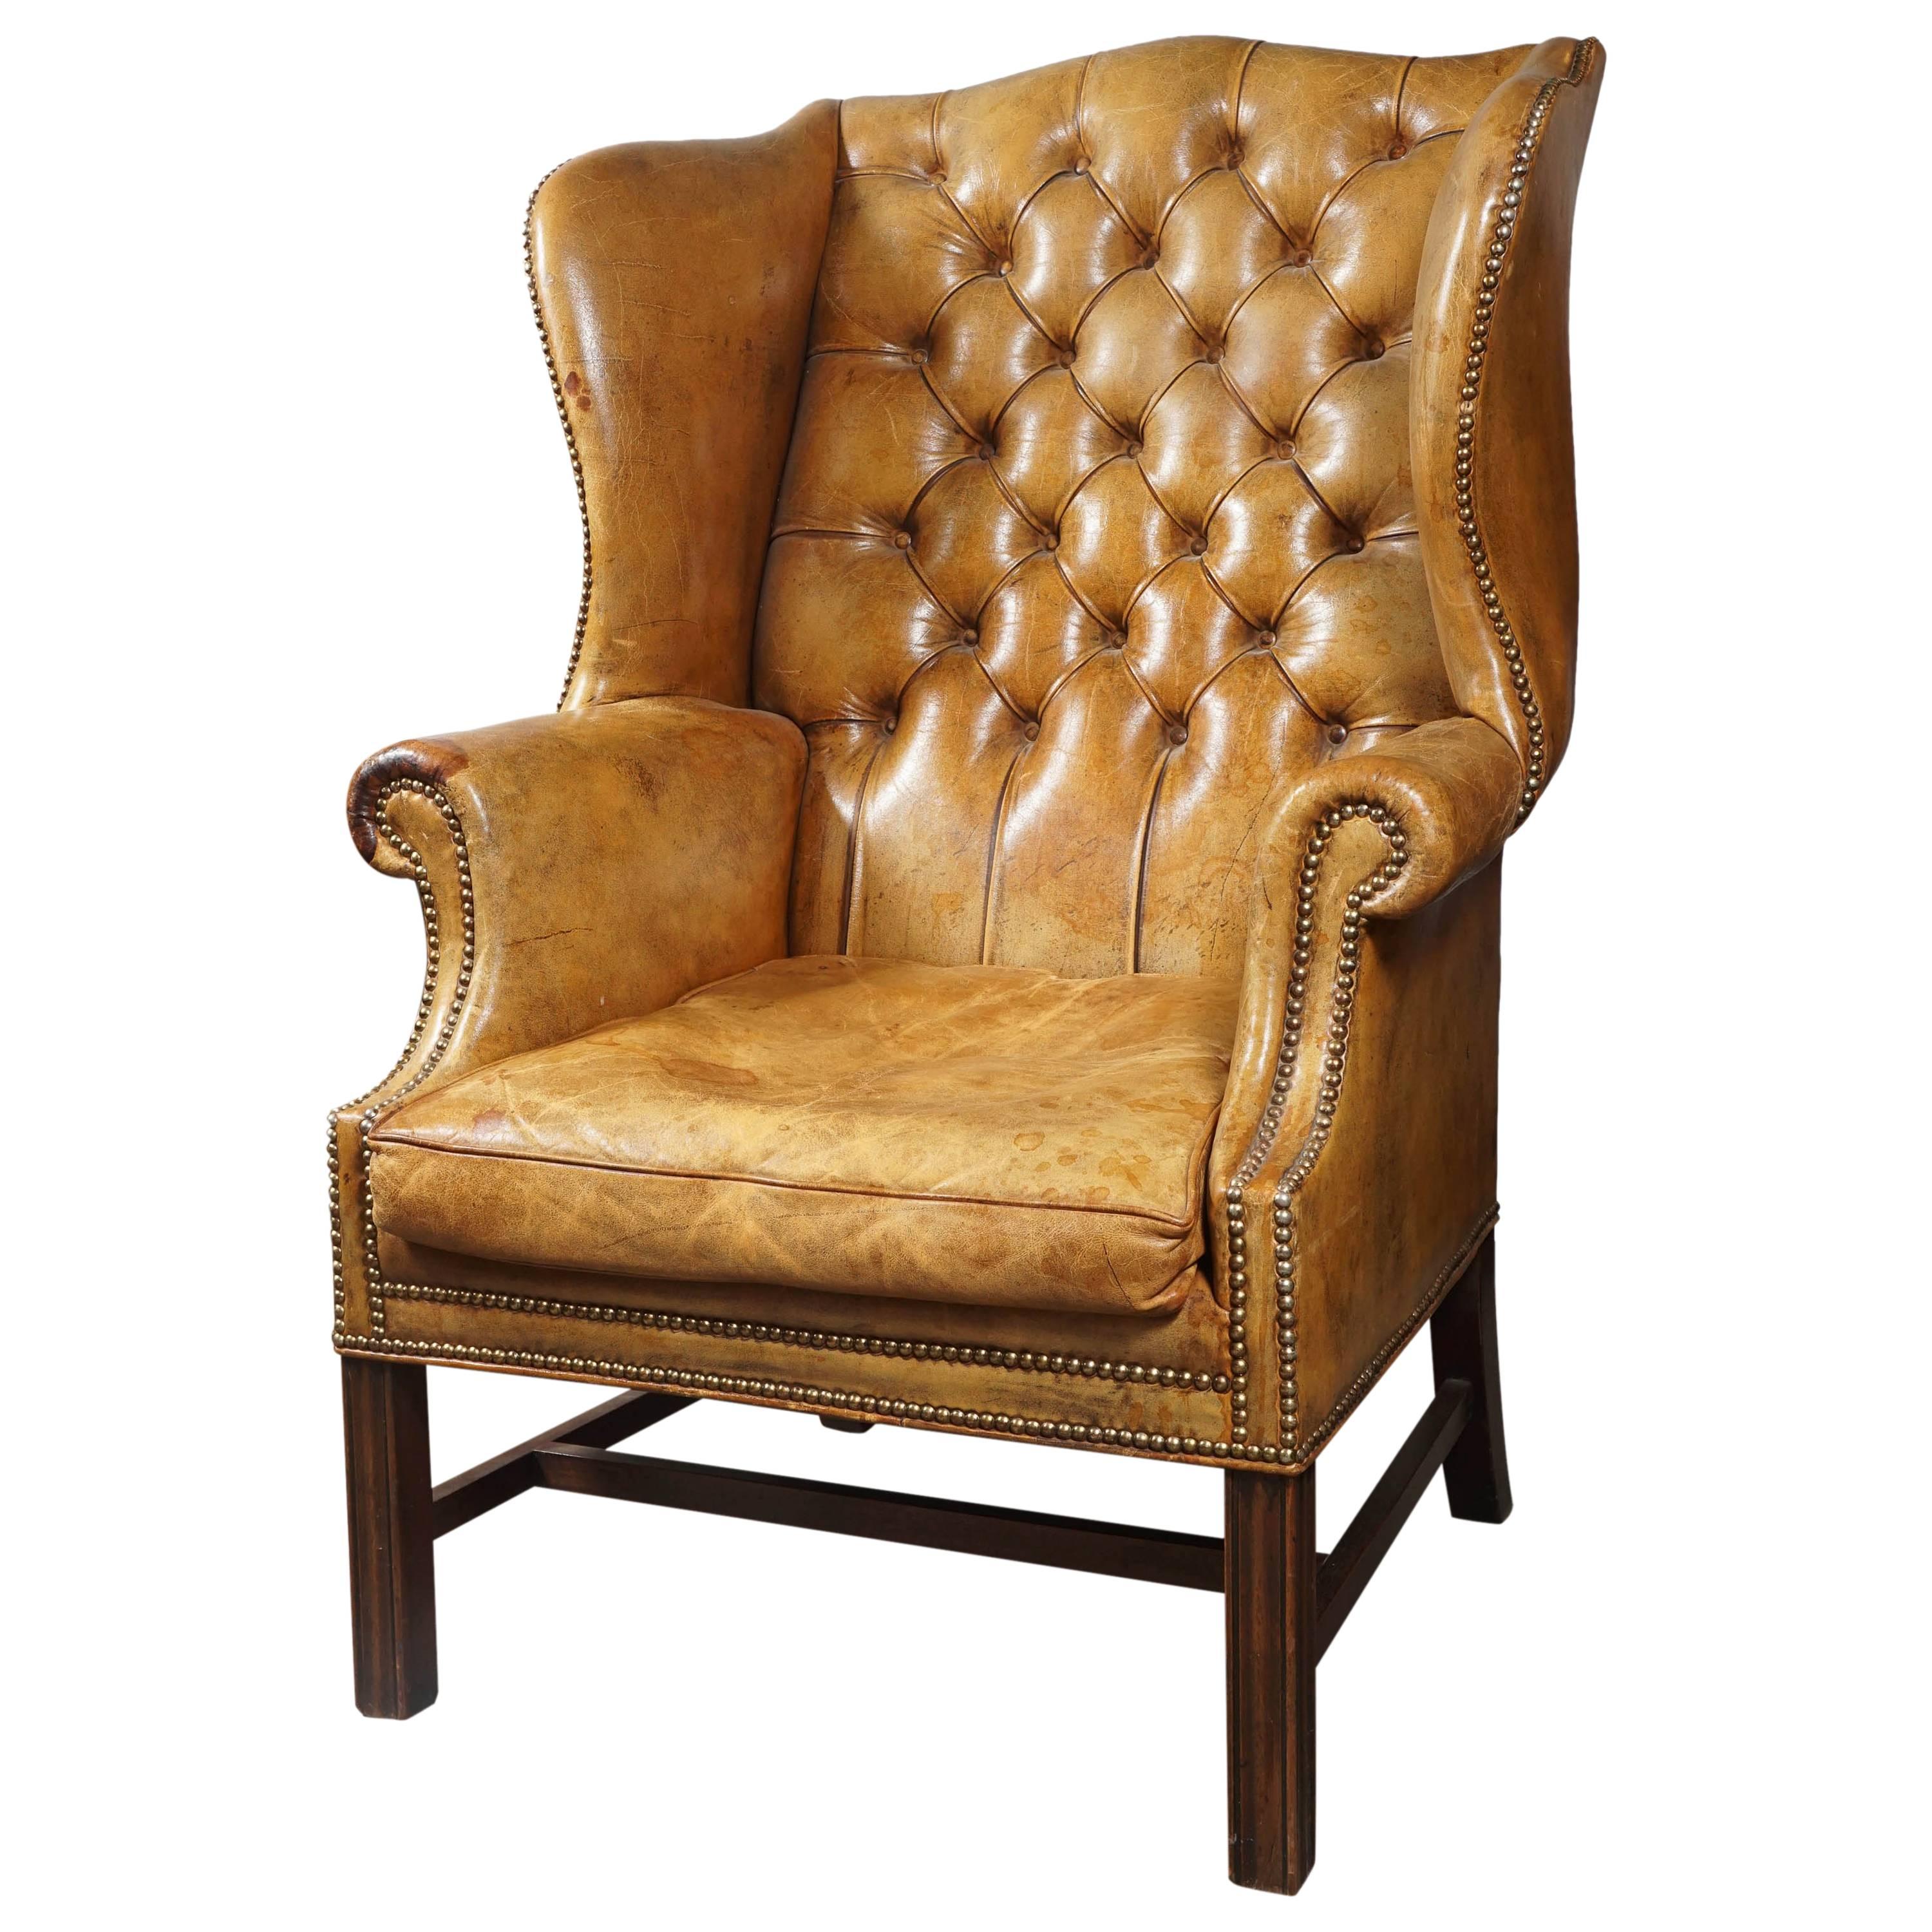 Tufted leather wingback chair